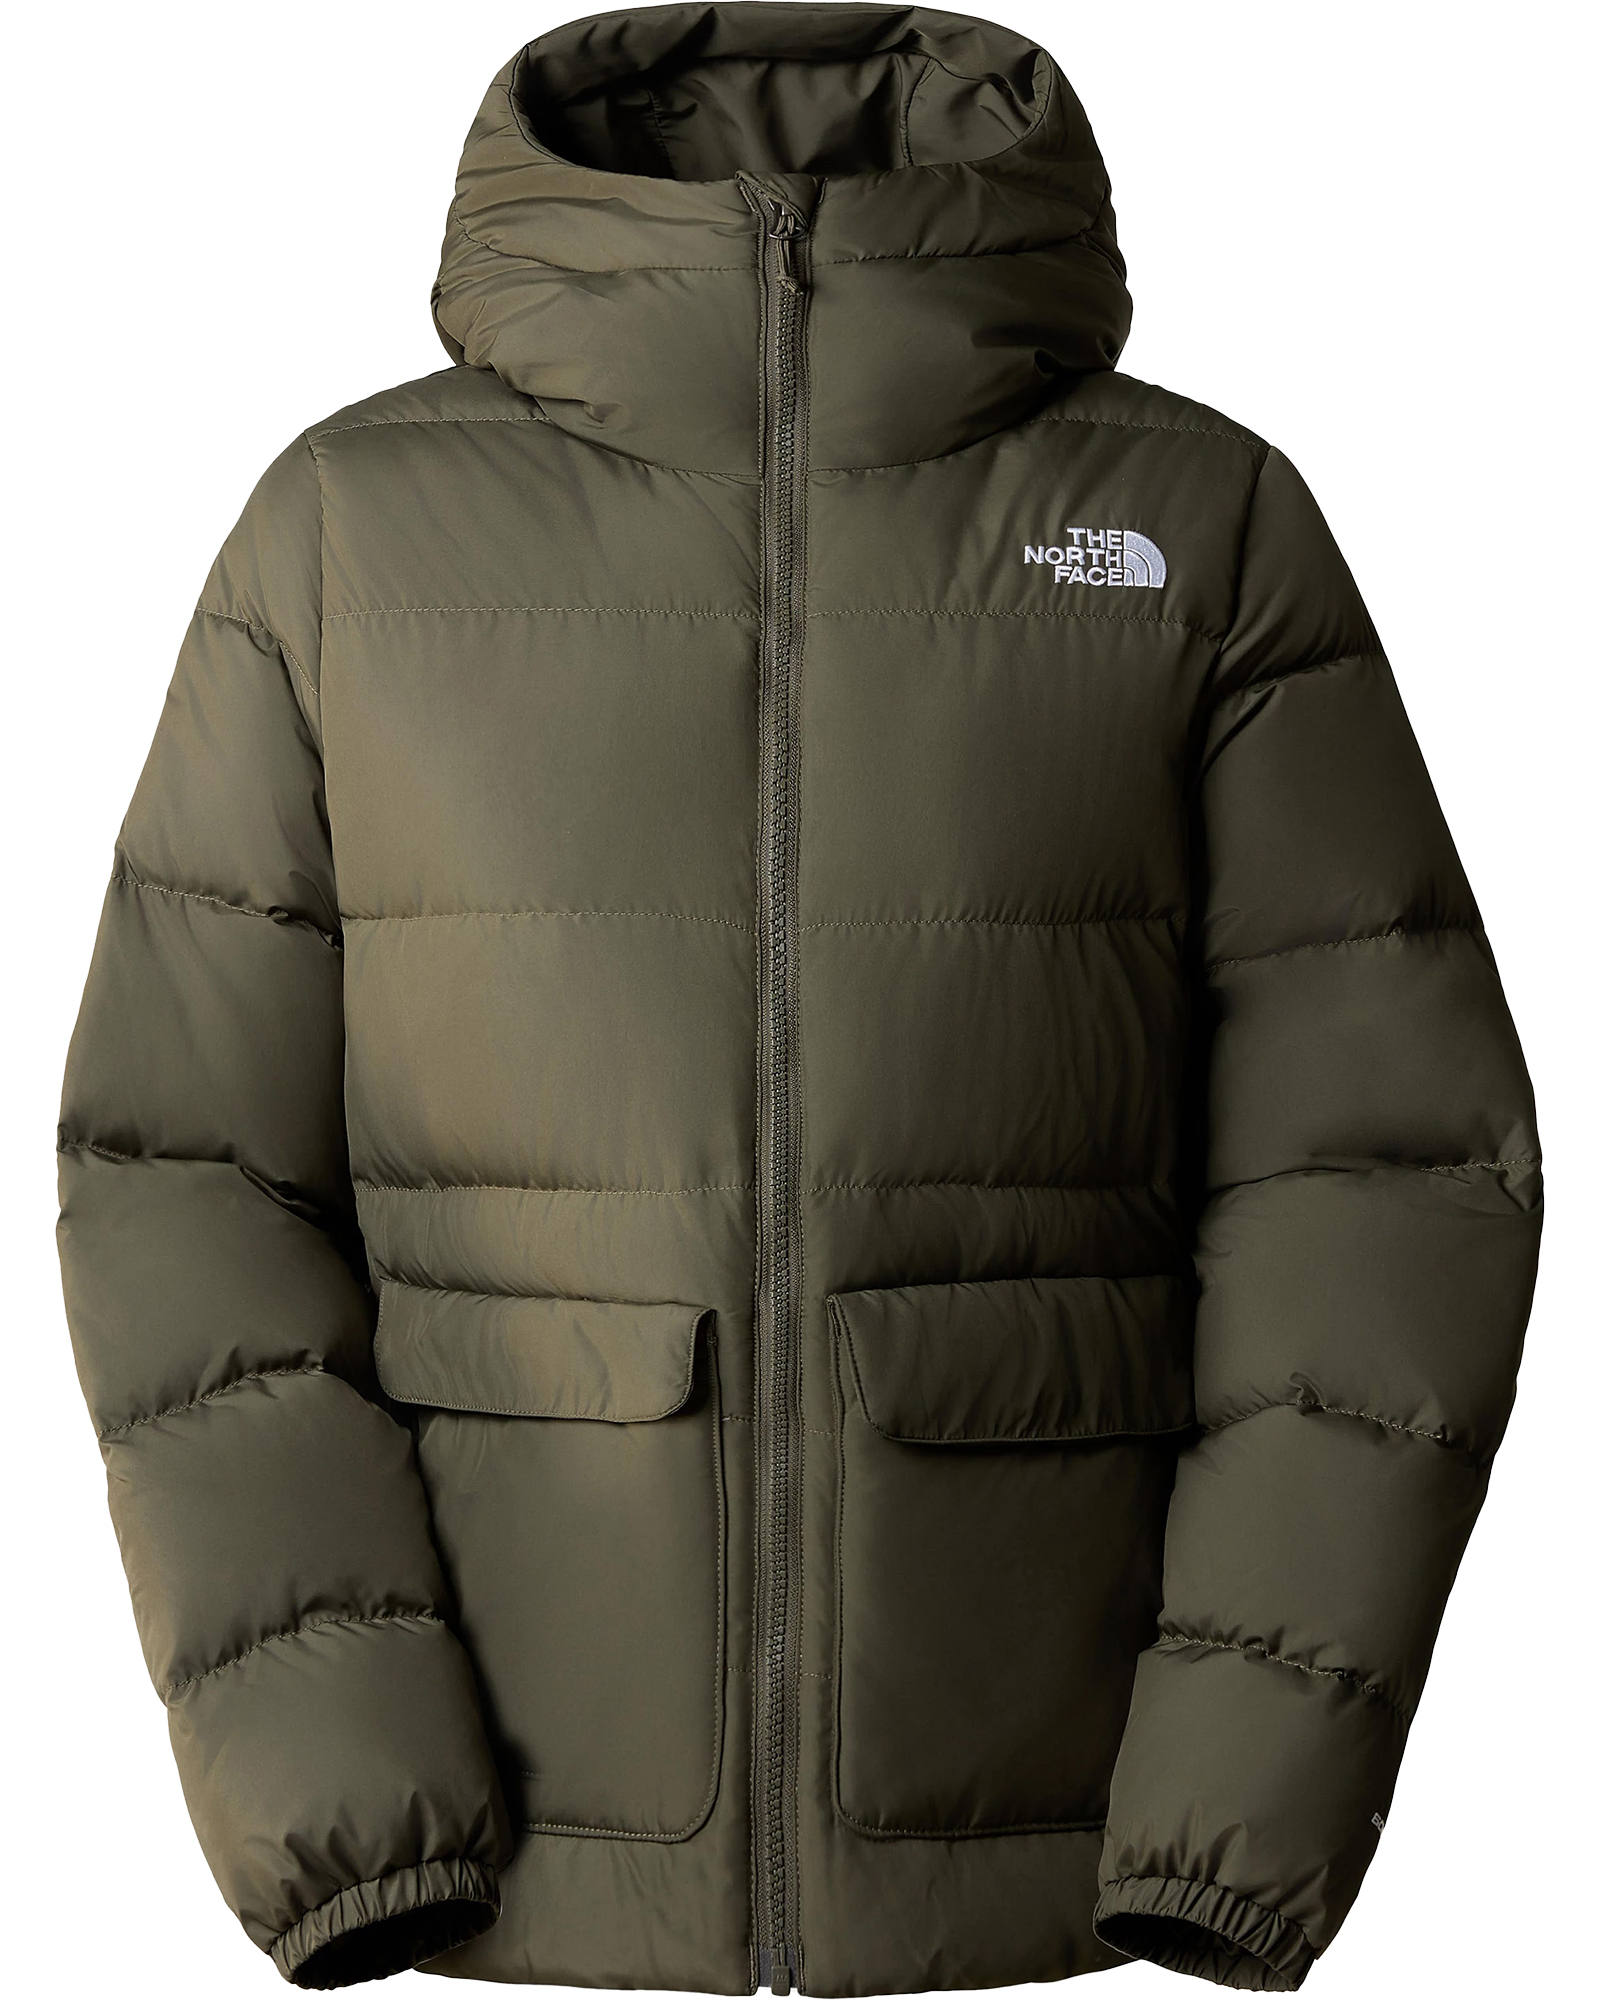 The North Face Women’s Gotham Down Jacket - New Taupe Green L